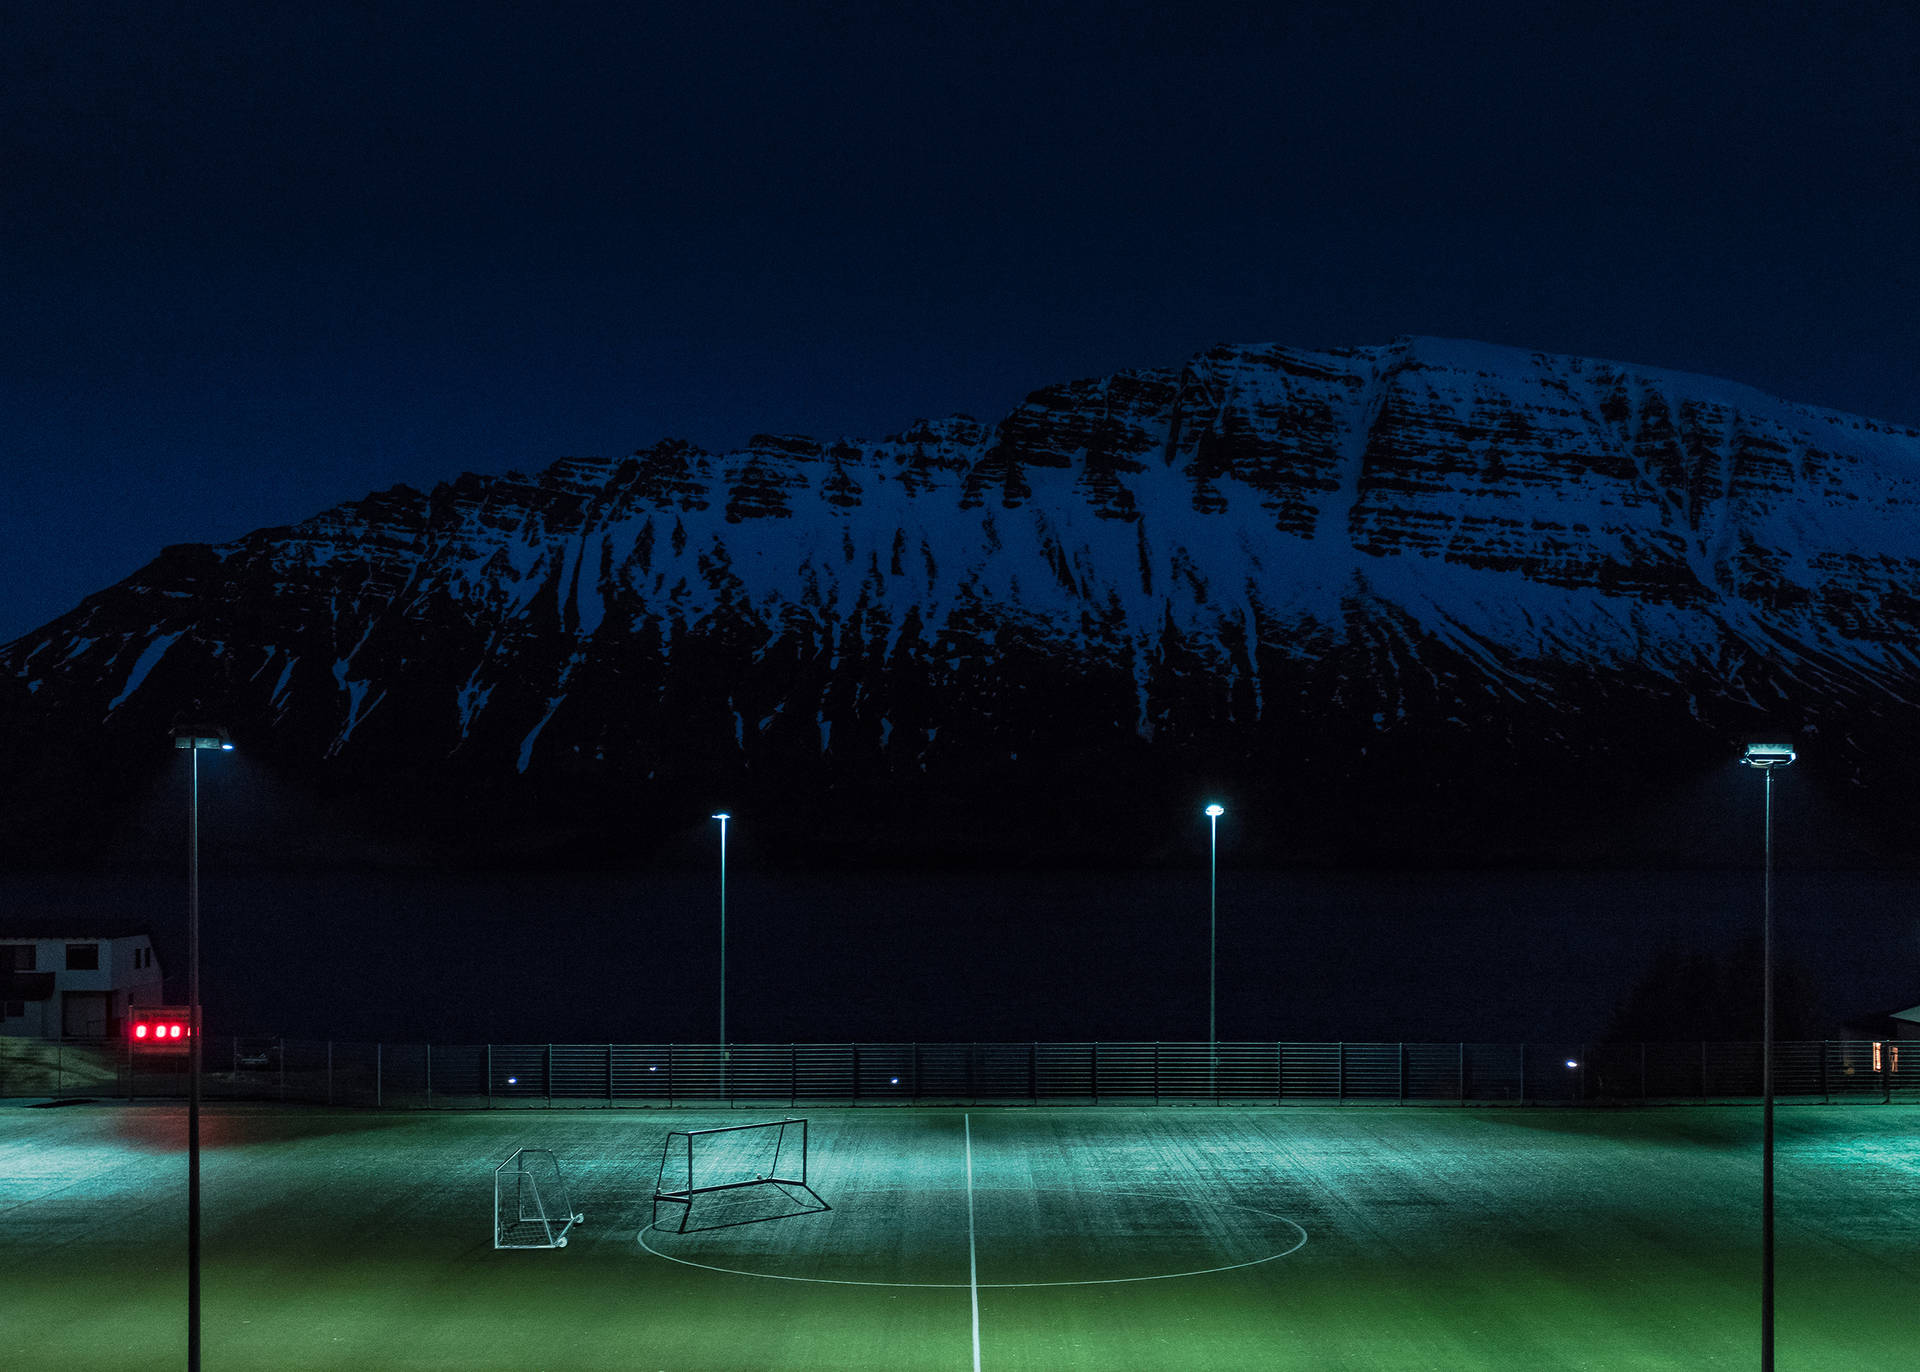 Illuminated night football field ready for the game. Wallpaper